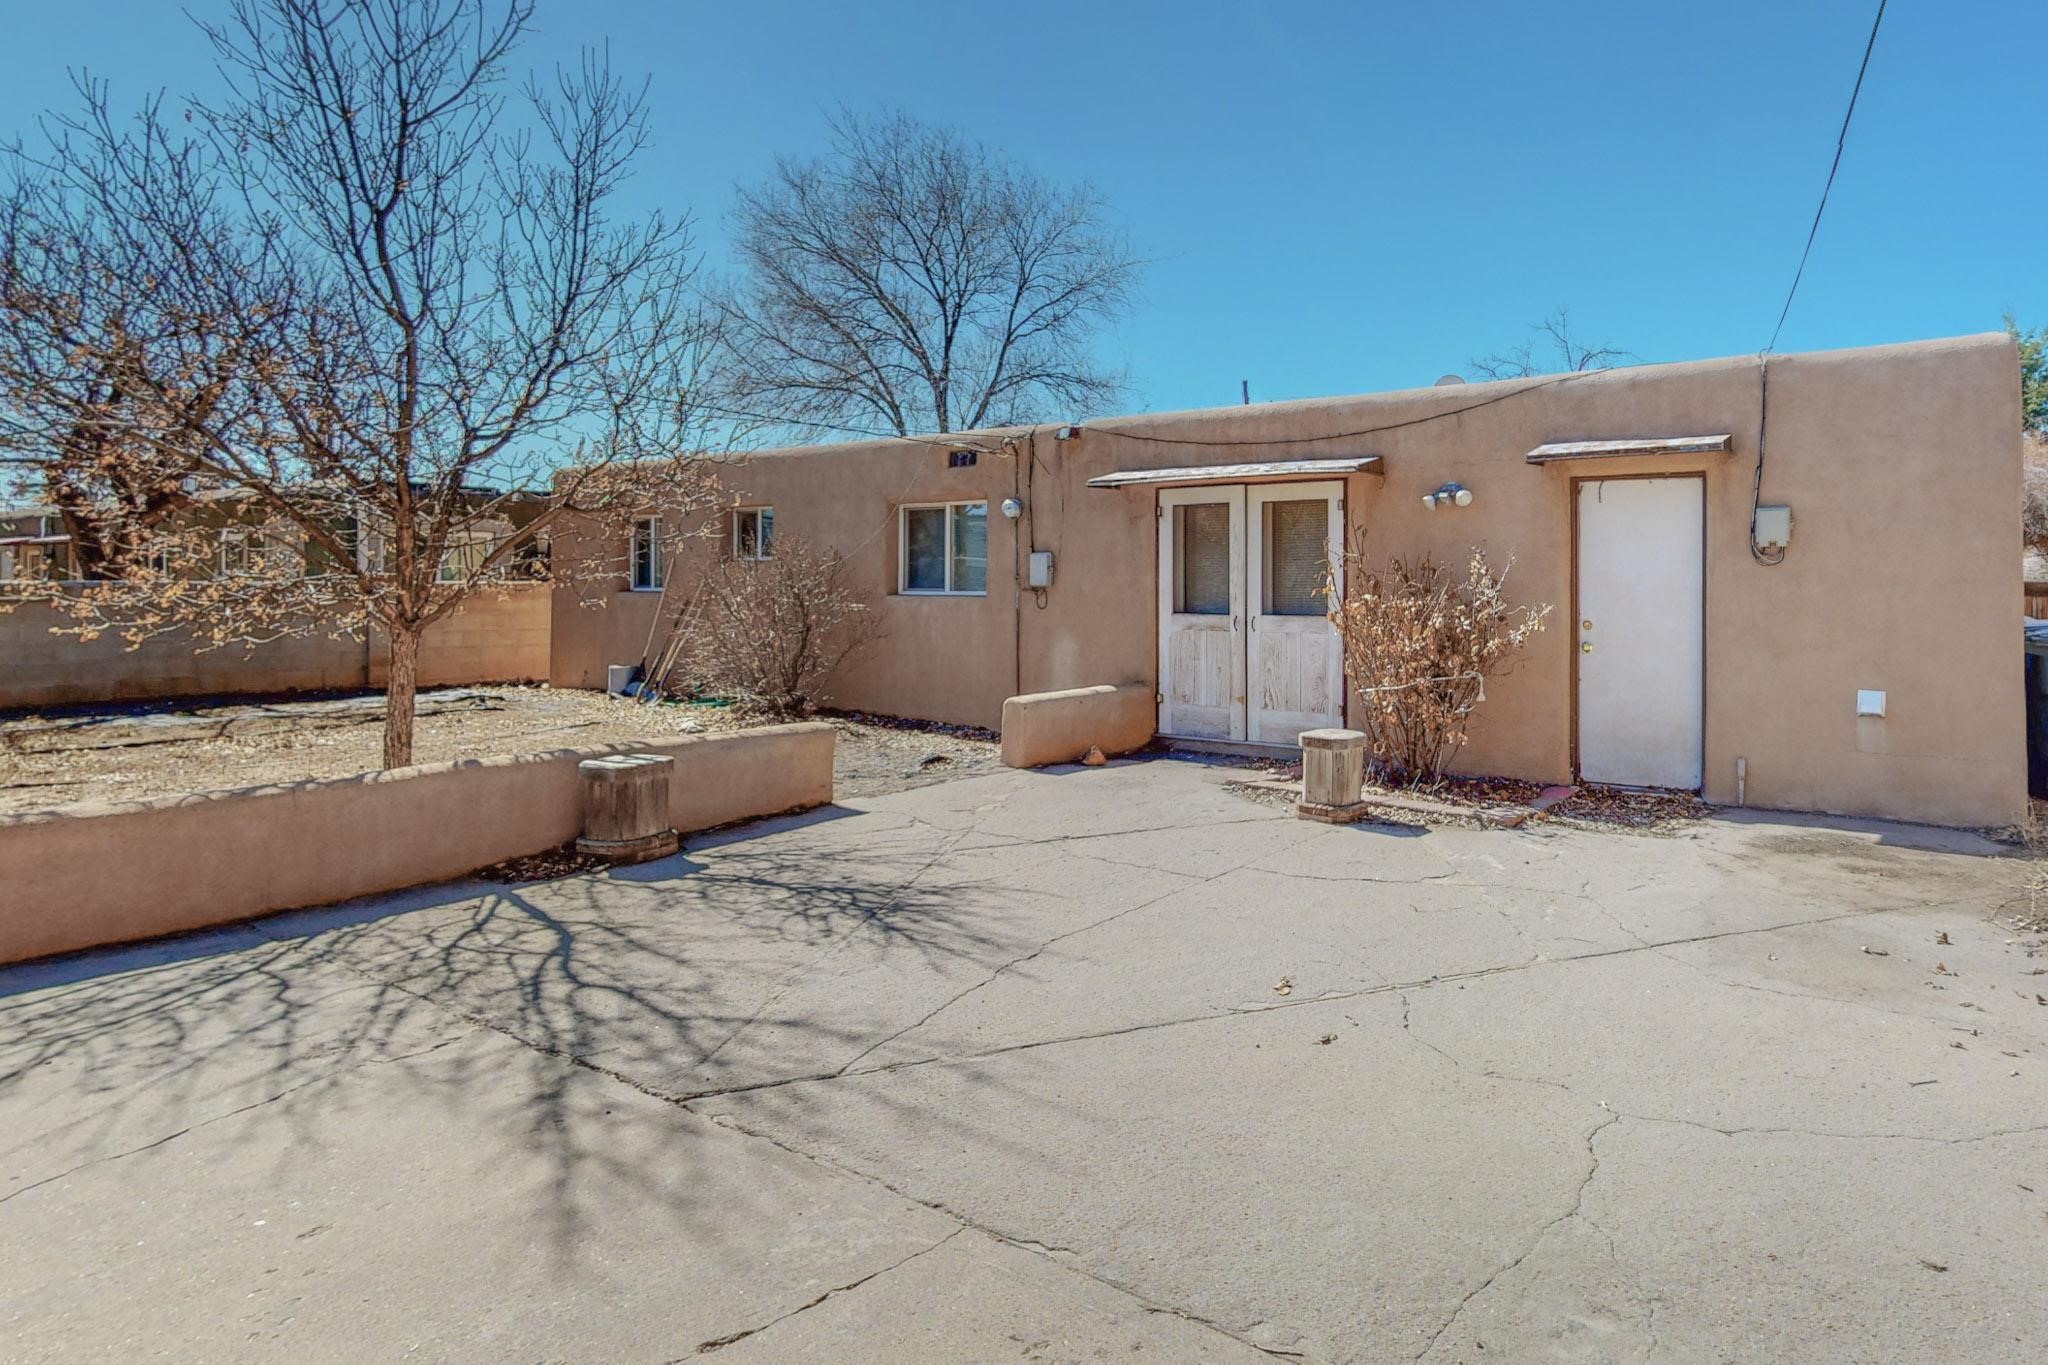 127 Spruce Street, Santa Fe, New Mexico 87501, 3 Bedrooms Bedrooms, ,1 BathroomBathrooms,Residential,For Sale,127 Spruce Street,202400673